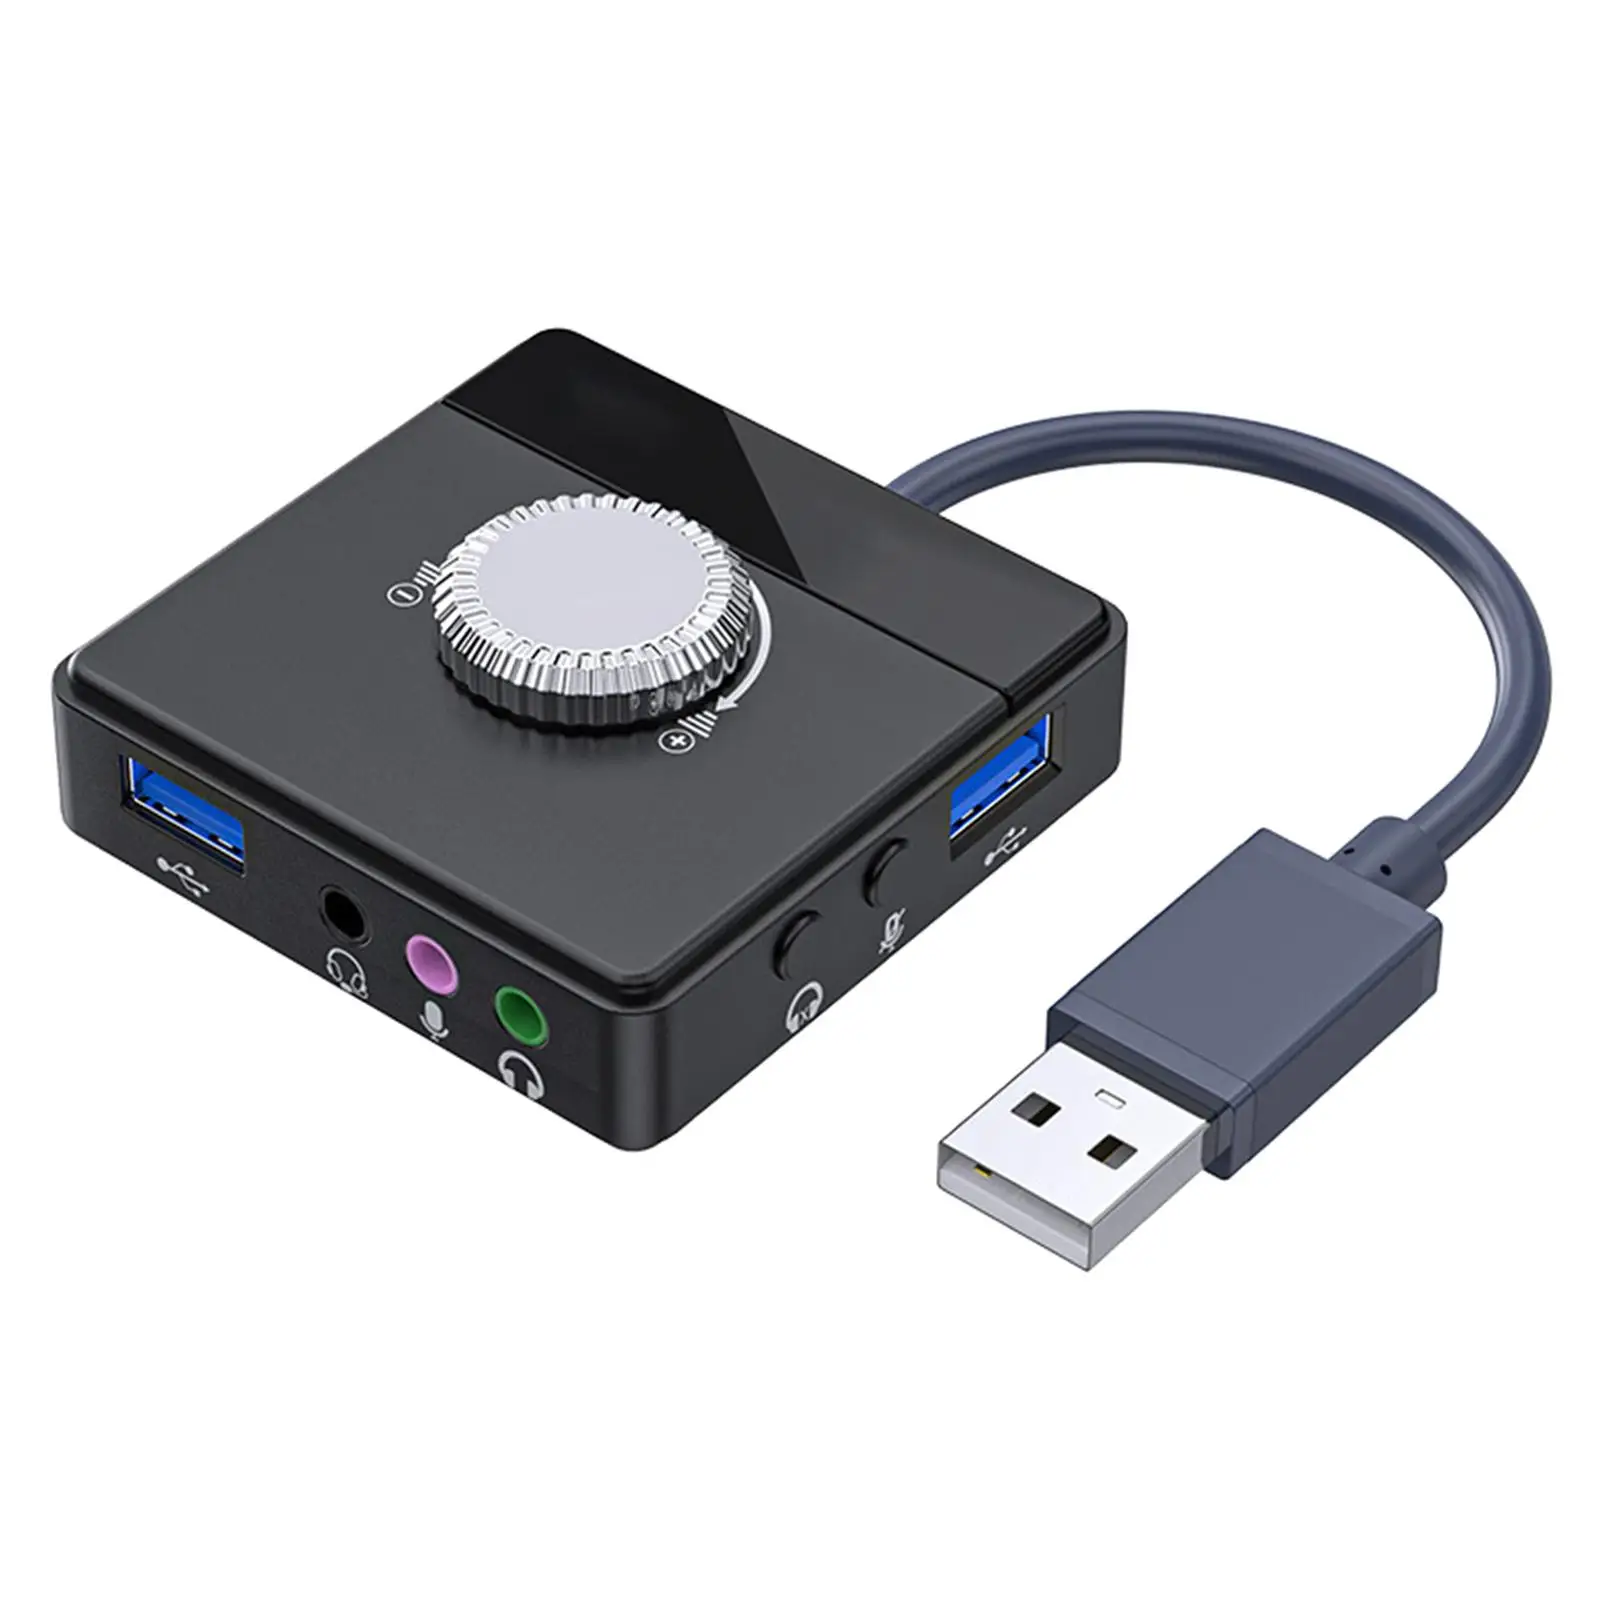 Sound Card External Stereo Audio Adapter 3 Ports Multifunction for USB Flash Disk